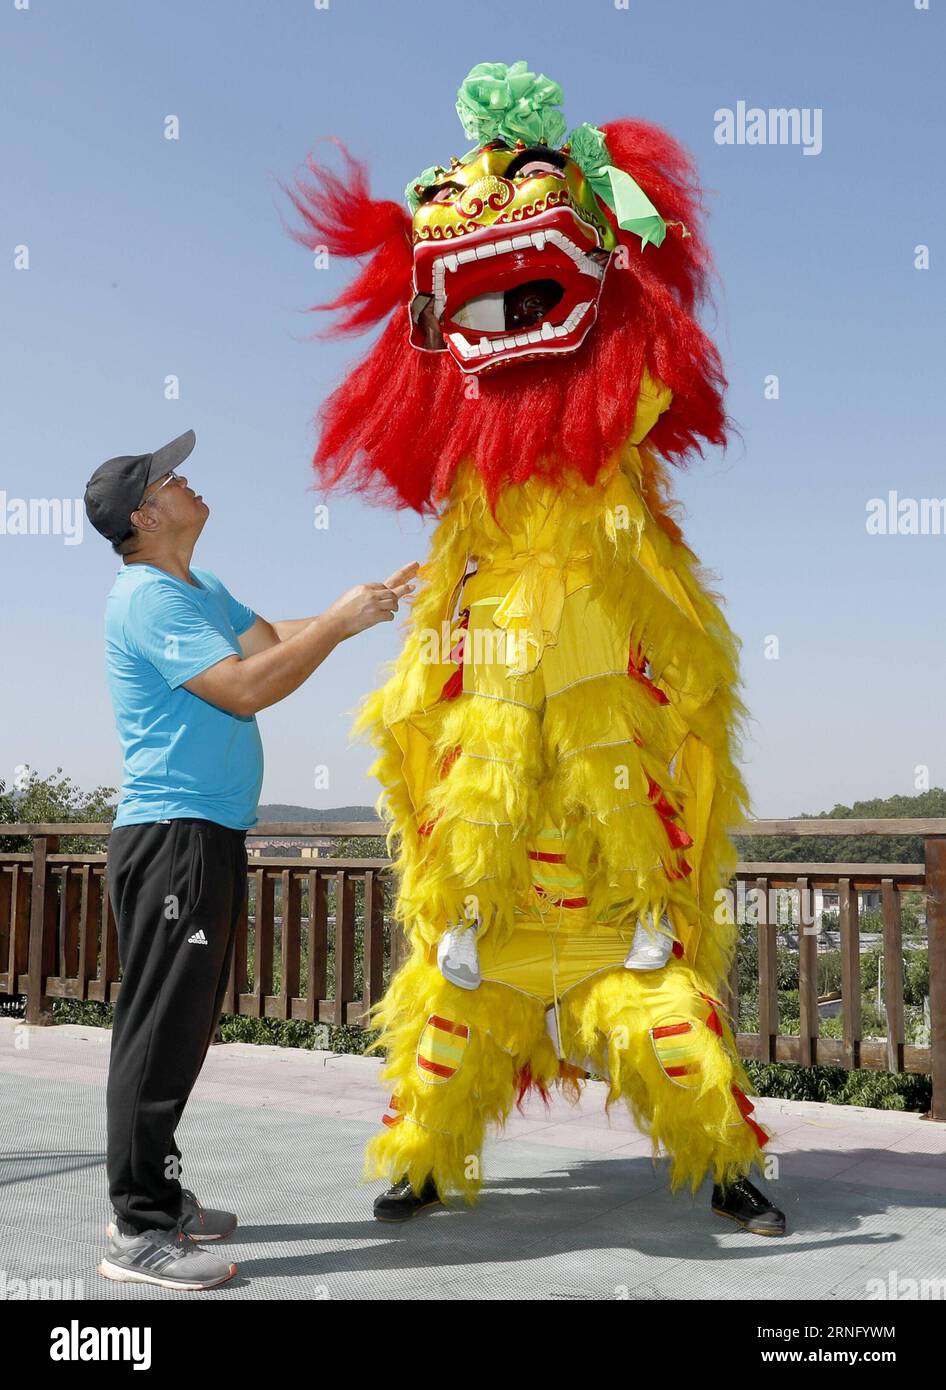 (160829) -- BEIJING, Aug. 29, 2016 -- Li Mingxu, an inheritor of Jinzhou Lion Dance, teaches an African trainee the essentials of lion dance performance during a training session in Dalian, northeast China s Liaoning Province, Aug. 28, 2016. As a China-Africa cultural exchange event, ten trainees from Zimbabwe and Nigeria participated in the five-week training course on the Chinese lion dance in Dalian. ) (wx) CHINA-DALIAN-AFRICAN TRAINEES-LION DANCE (CN) ChenxJianli PUBLICATIONxNOTxINxCHN   160829 Beijing Aug 29 2016 left  to inheritor of Jinzhou Lion Dance teaches to African Trainee The esse Stock Photo